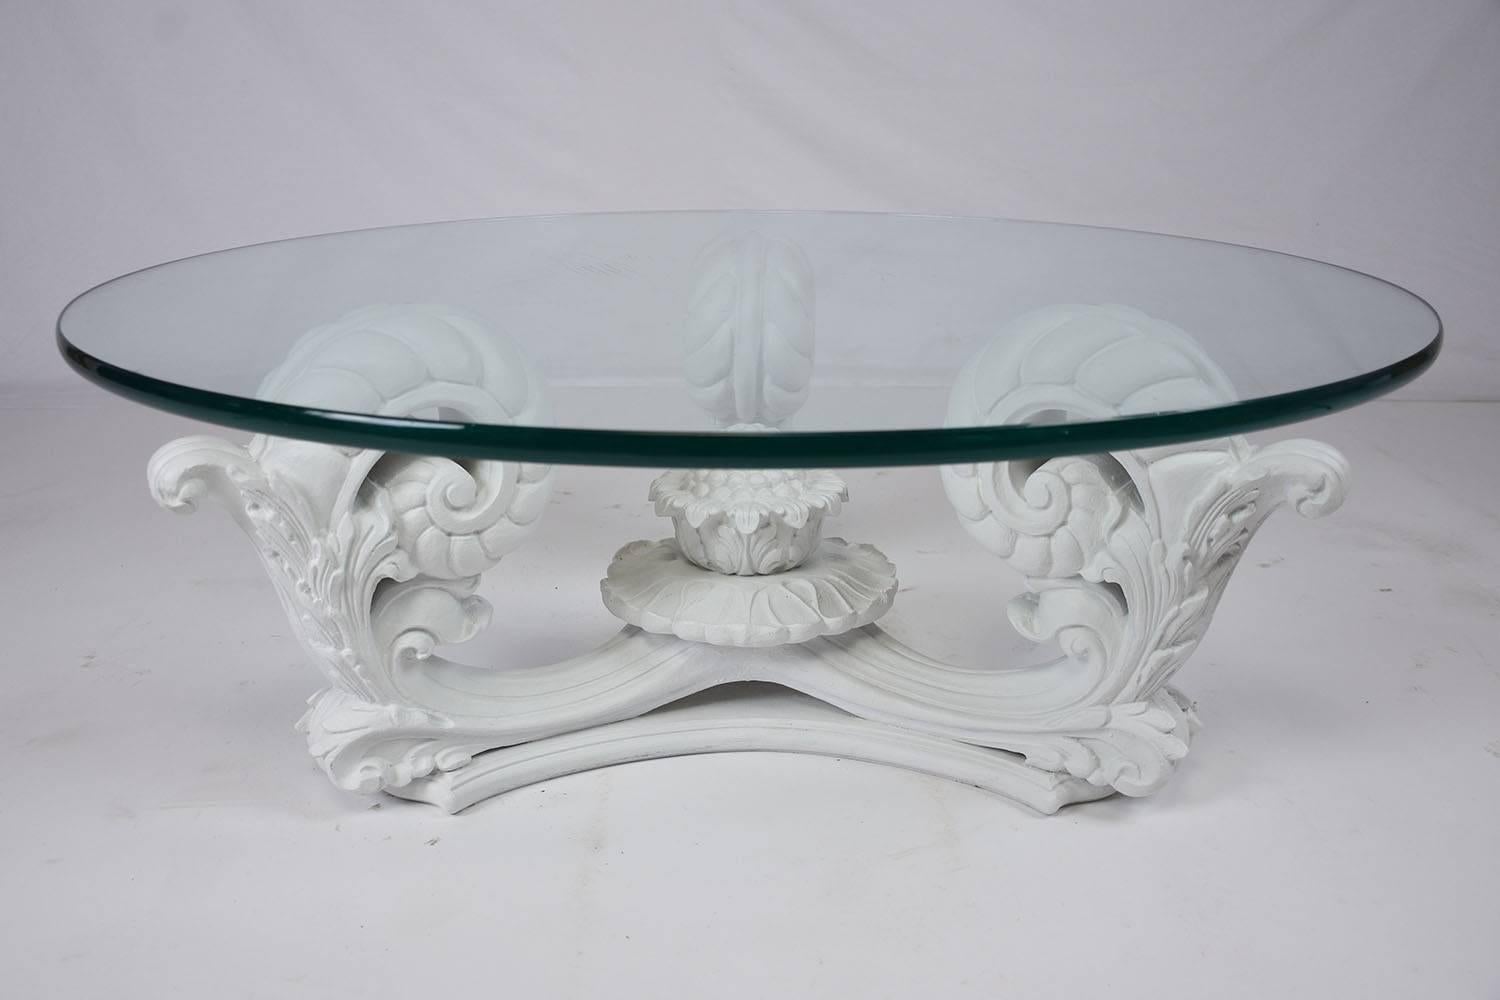 This 1960s Hollywood Regency-style coffee table features an ornately carved wood coffee table that has been painted in a pure white satin finish. The scroll arm designed base features acanthus leave decorations with a beautiful flower in the center.